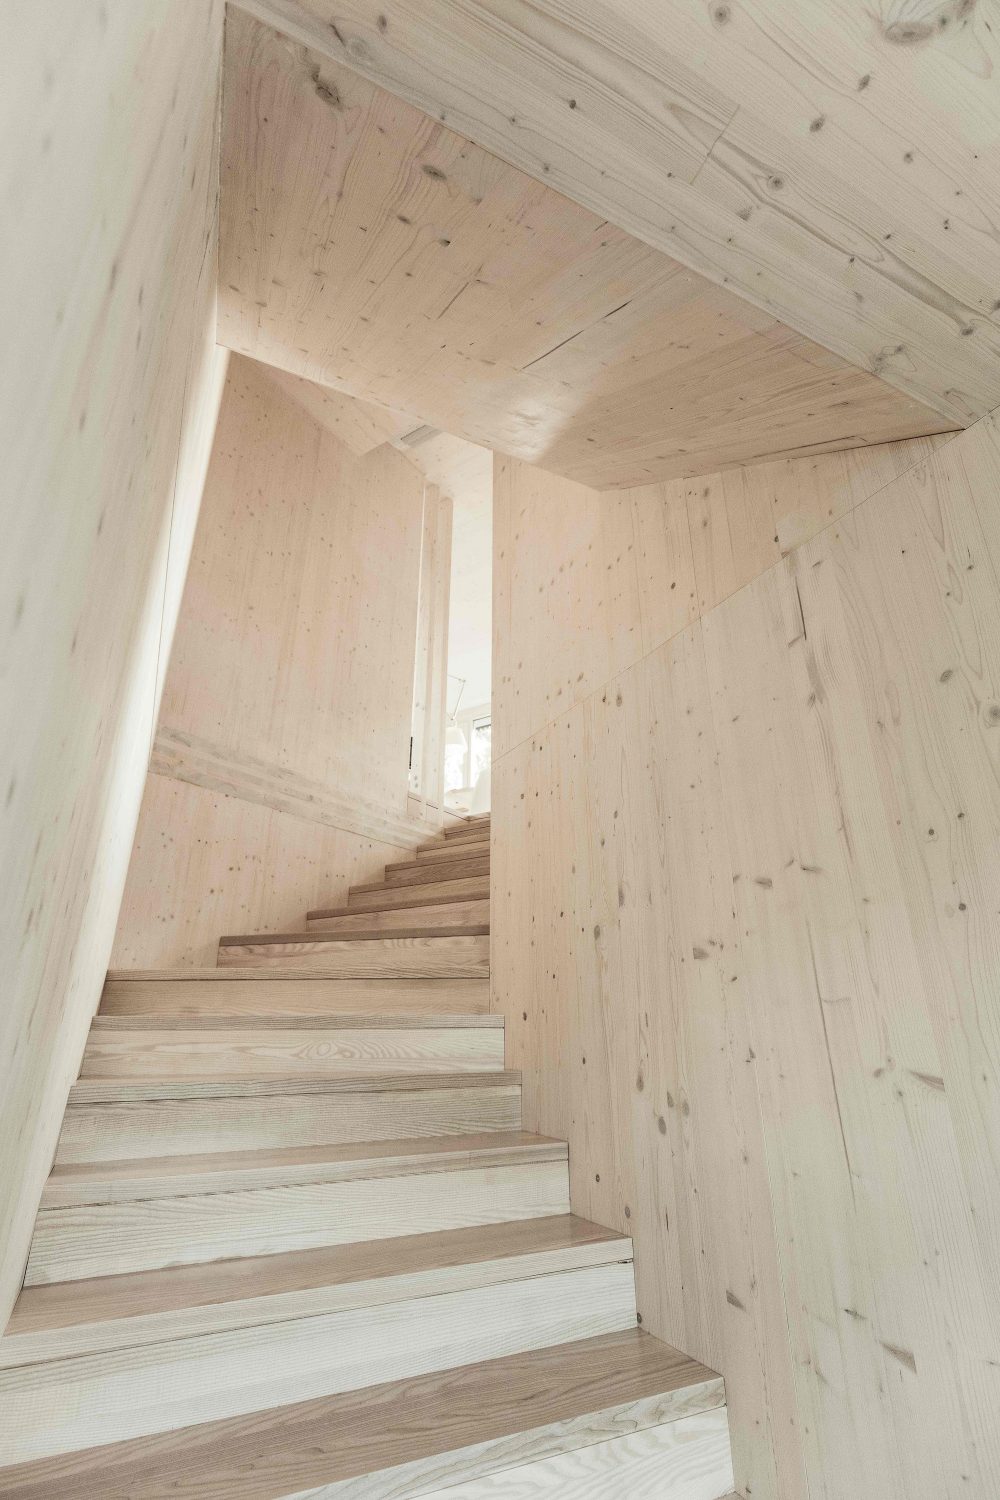 52 Cubic Wood by JOSEP and Atelier Haumer